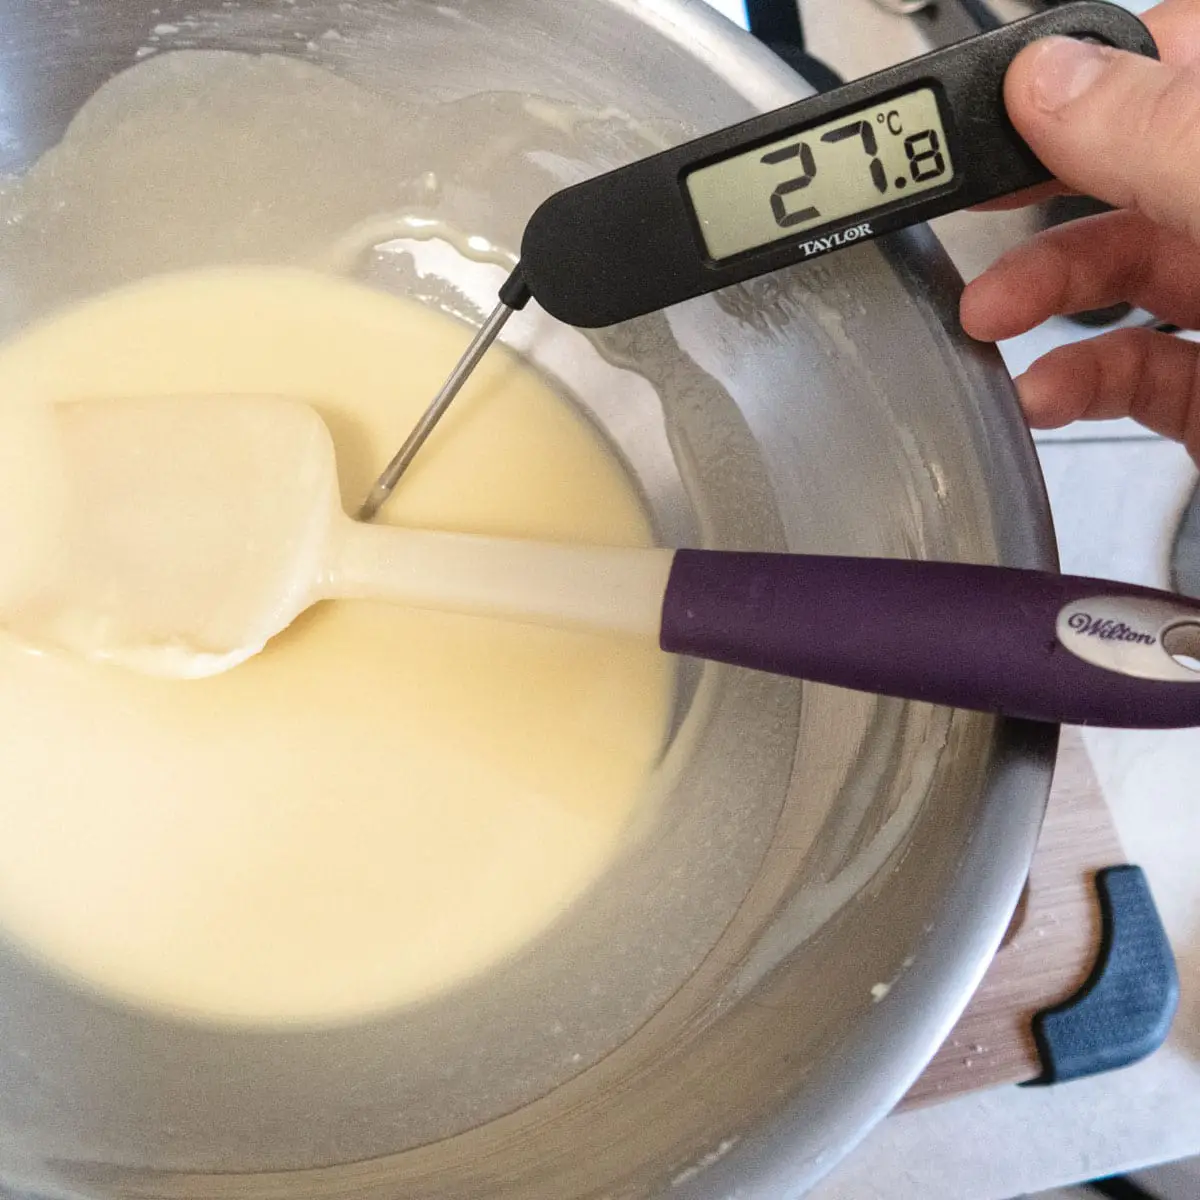 a bowl of white chocolate being checked in temperature with a digital thermometer